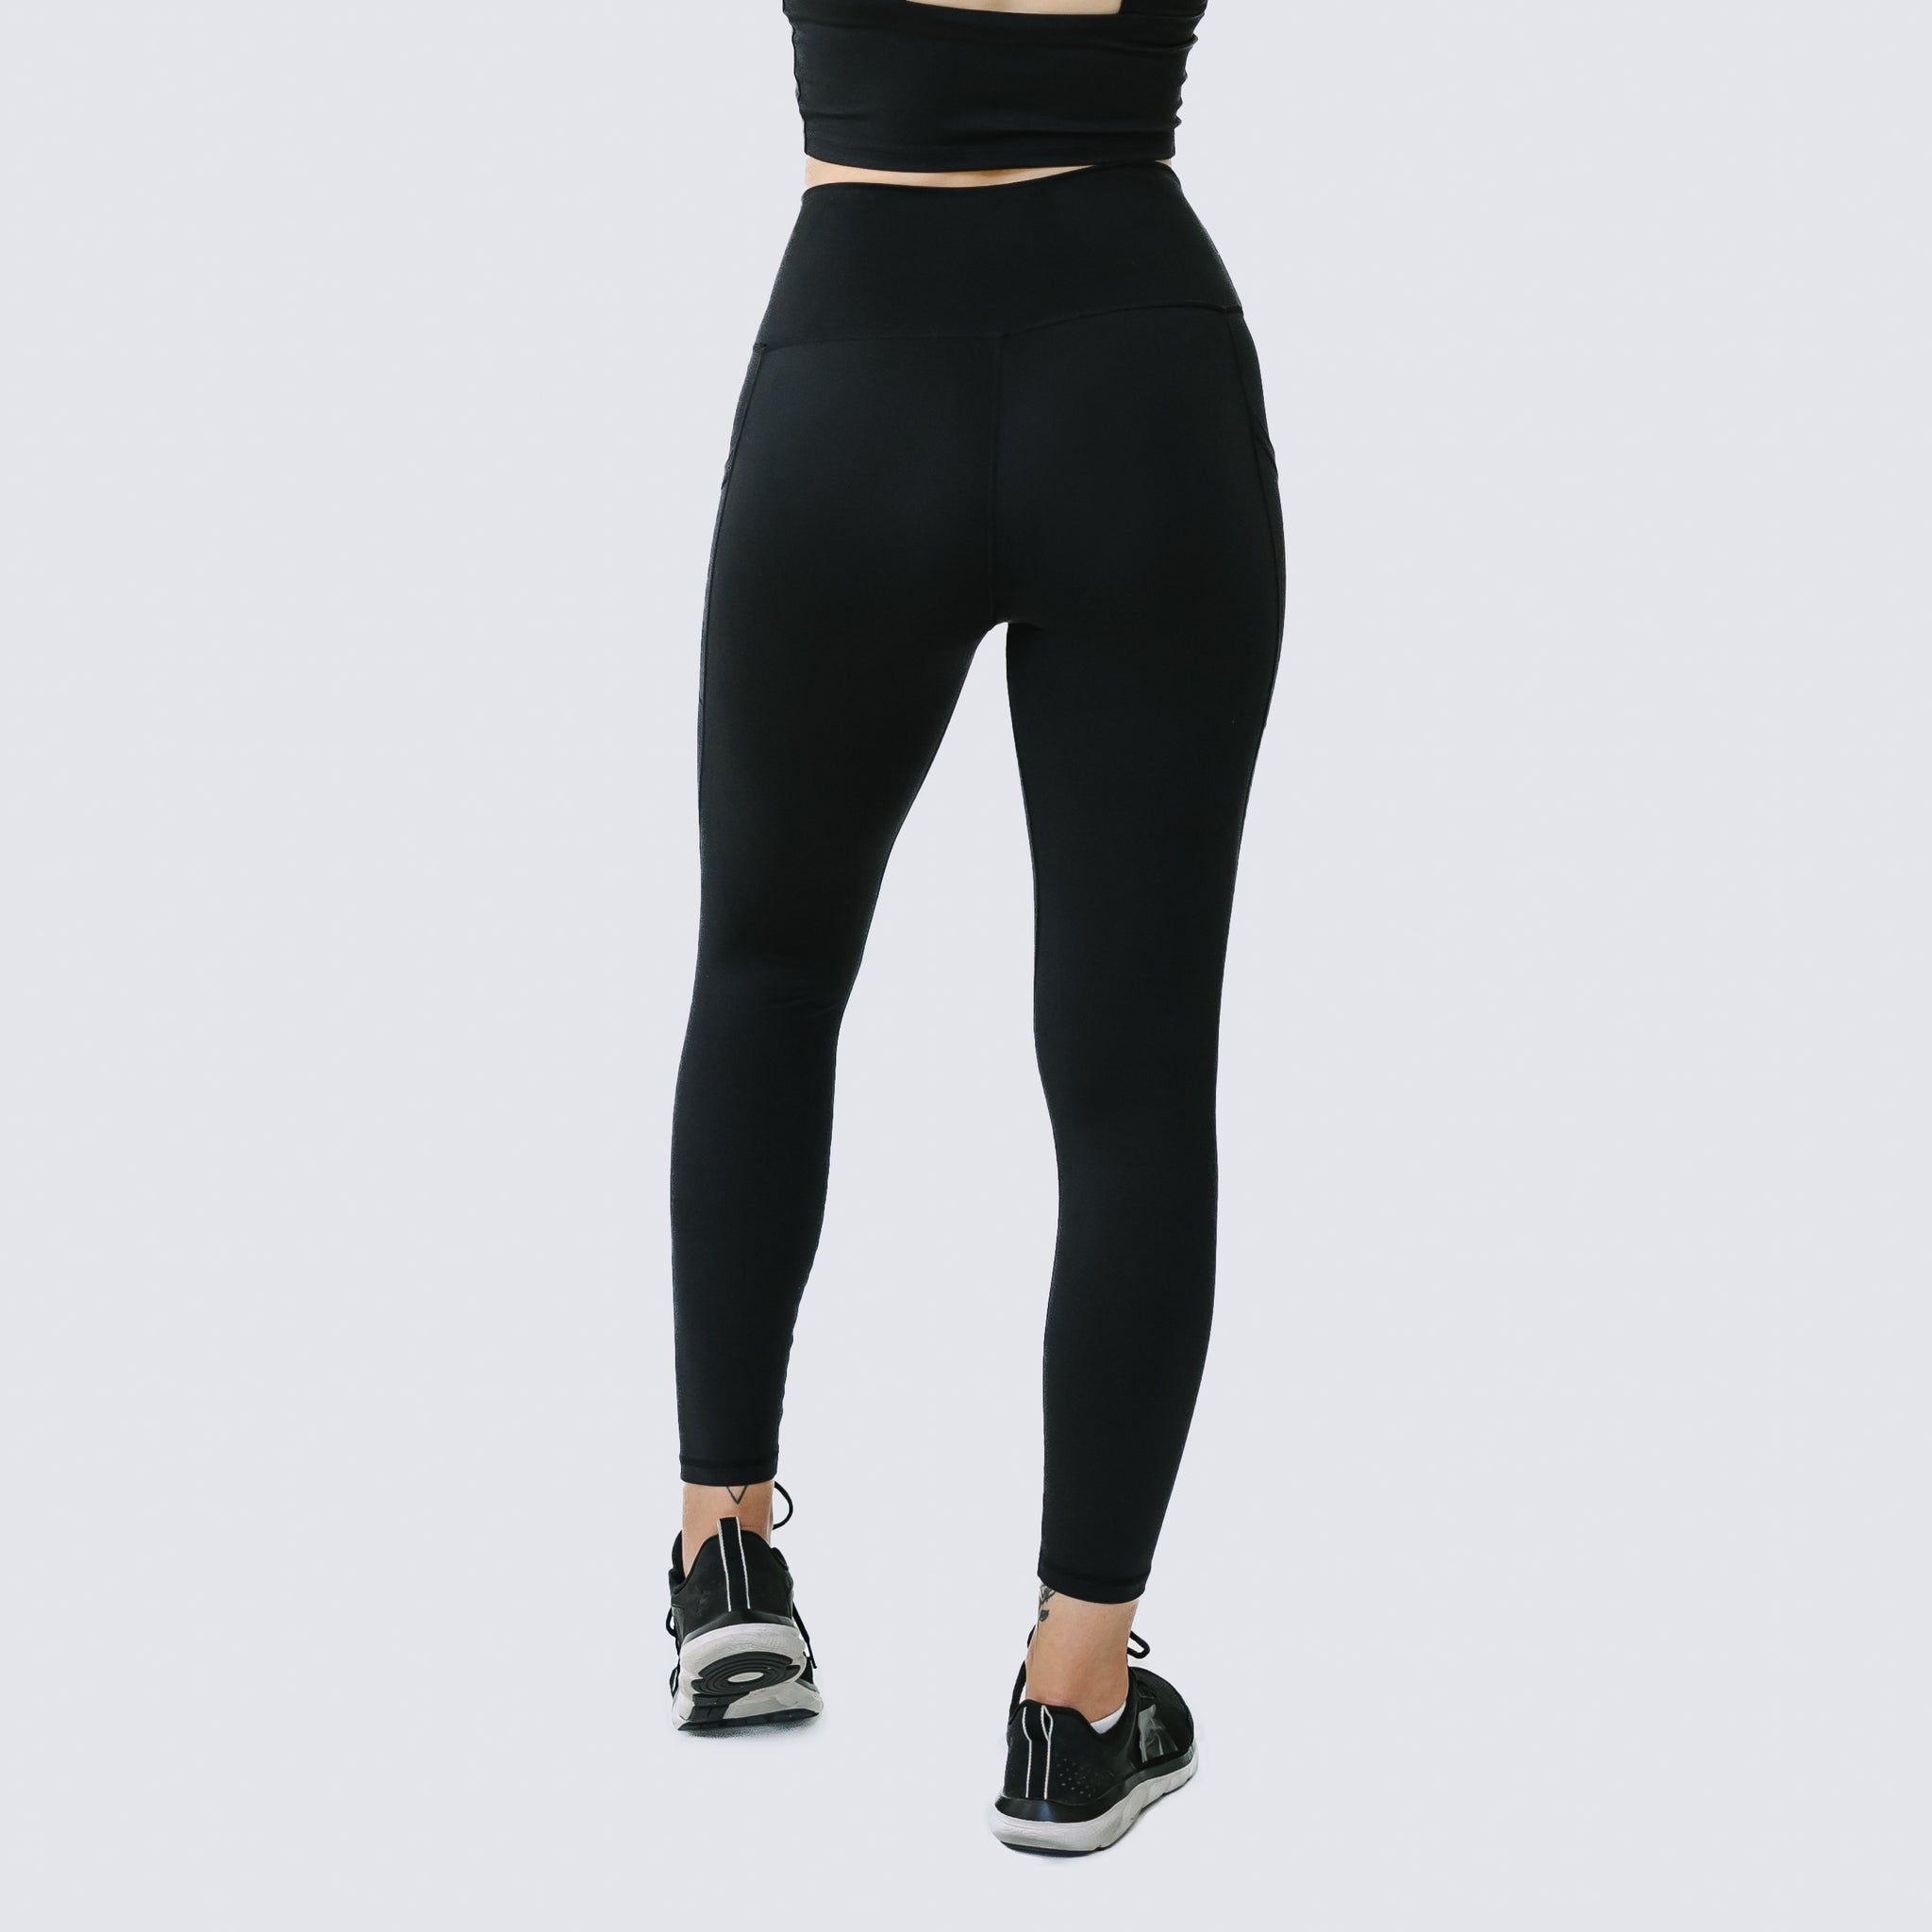 GYMSHARK CAPTIVATE BLACK Soft Silky Leggings Small Fashion High Waisted  £10.10 - PicClick UK